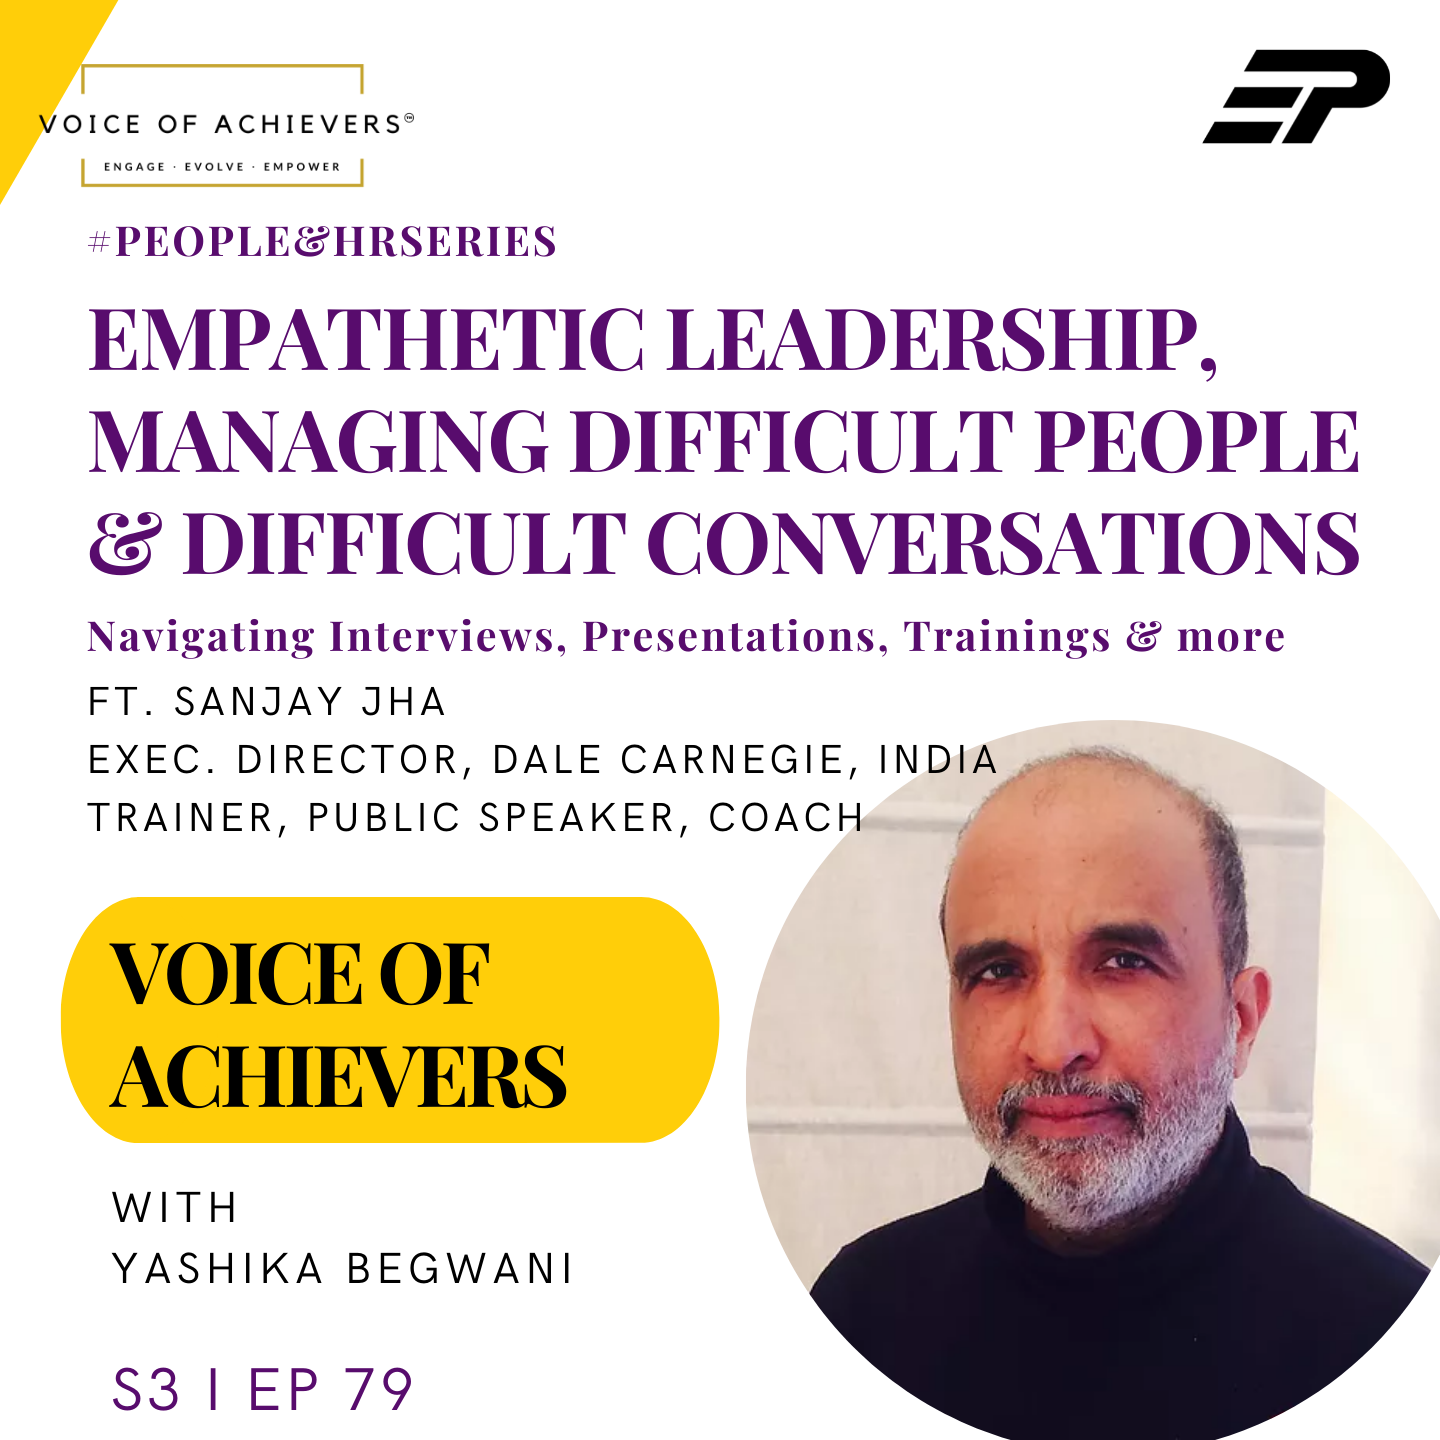 Empathetic Leadership, Managing Difficult People & Difficult Conversations Ft Sanjay Jha